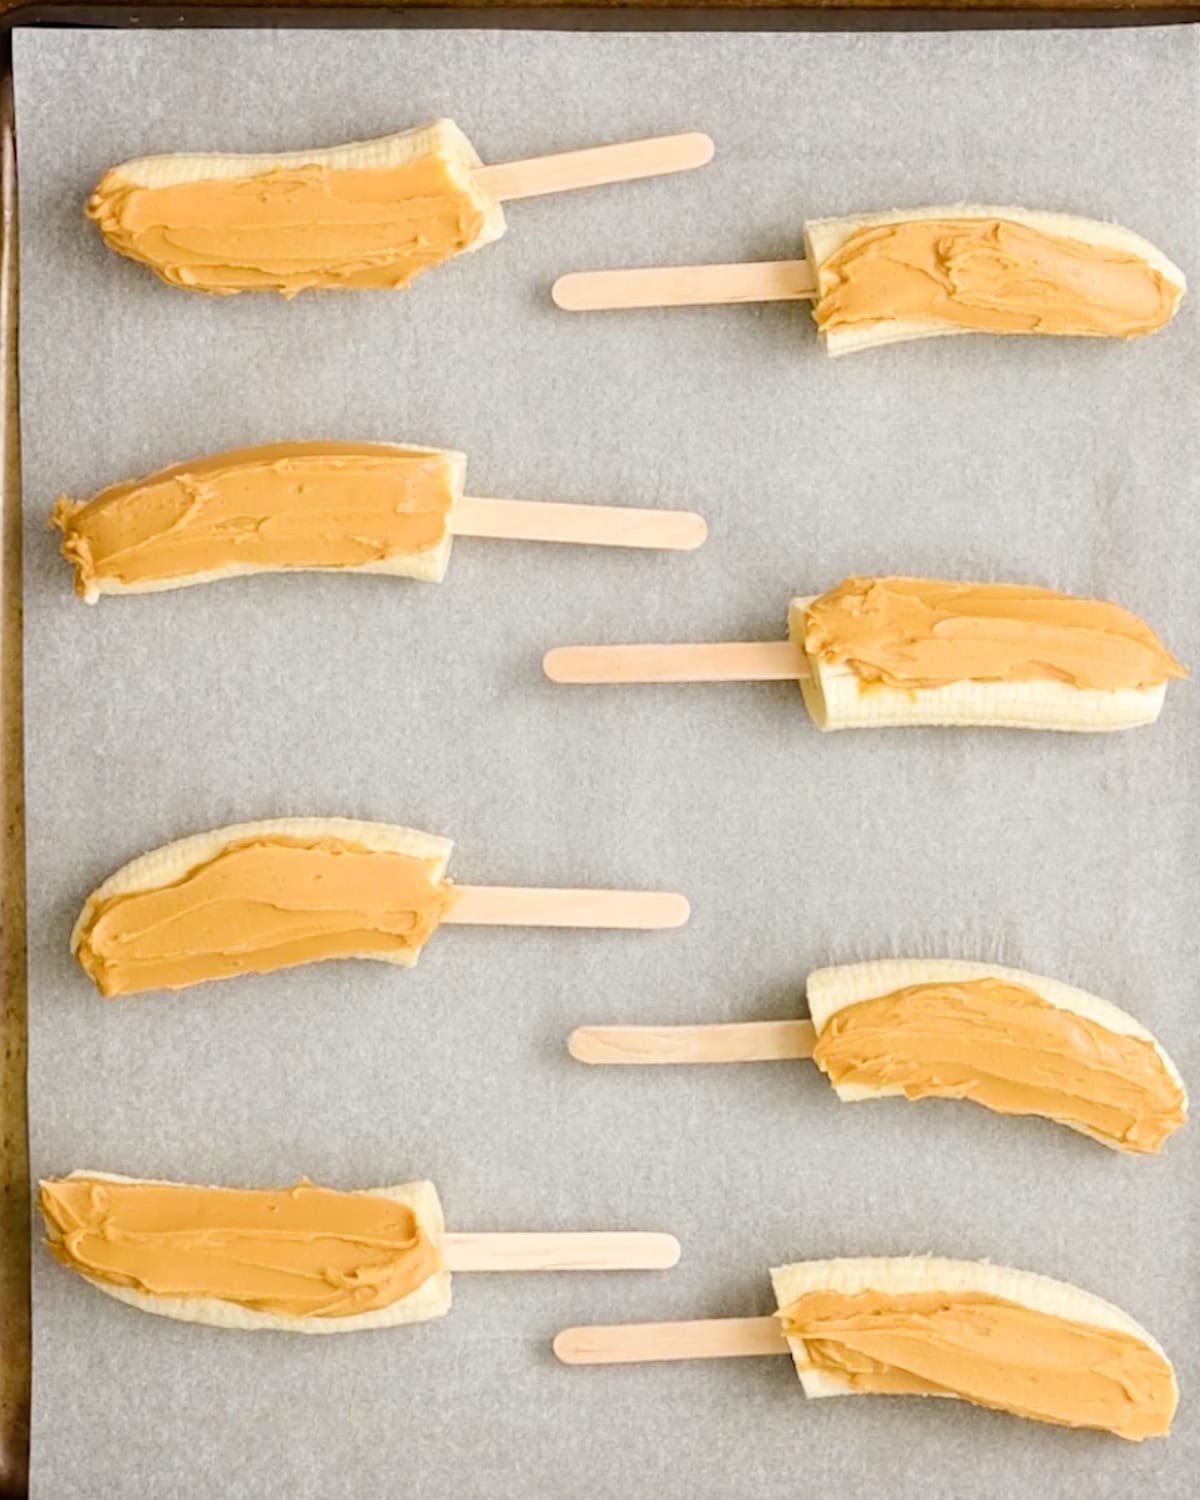 8 banana halves spread with peanut butter on a wax-paper lined baking sheet